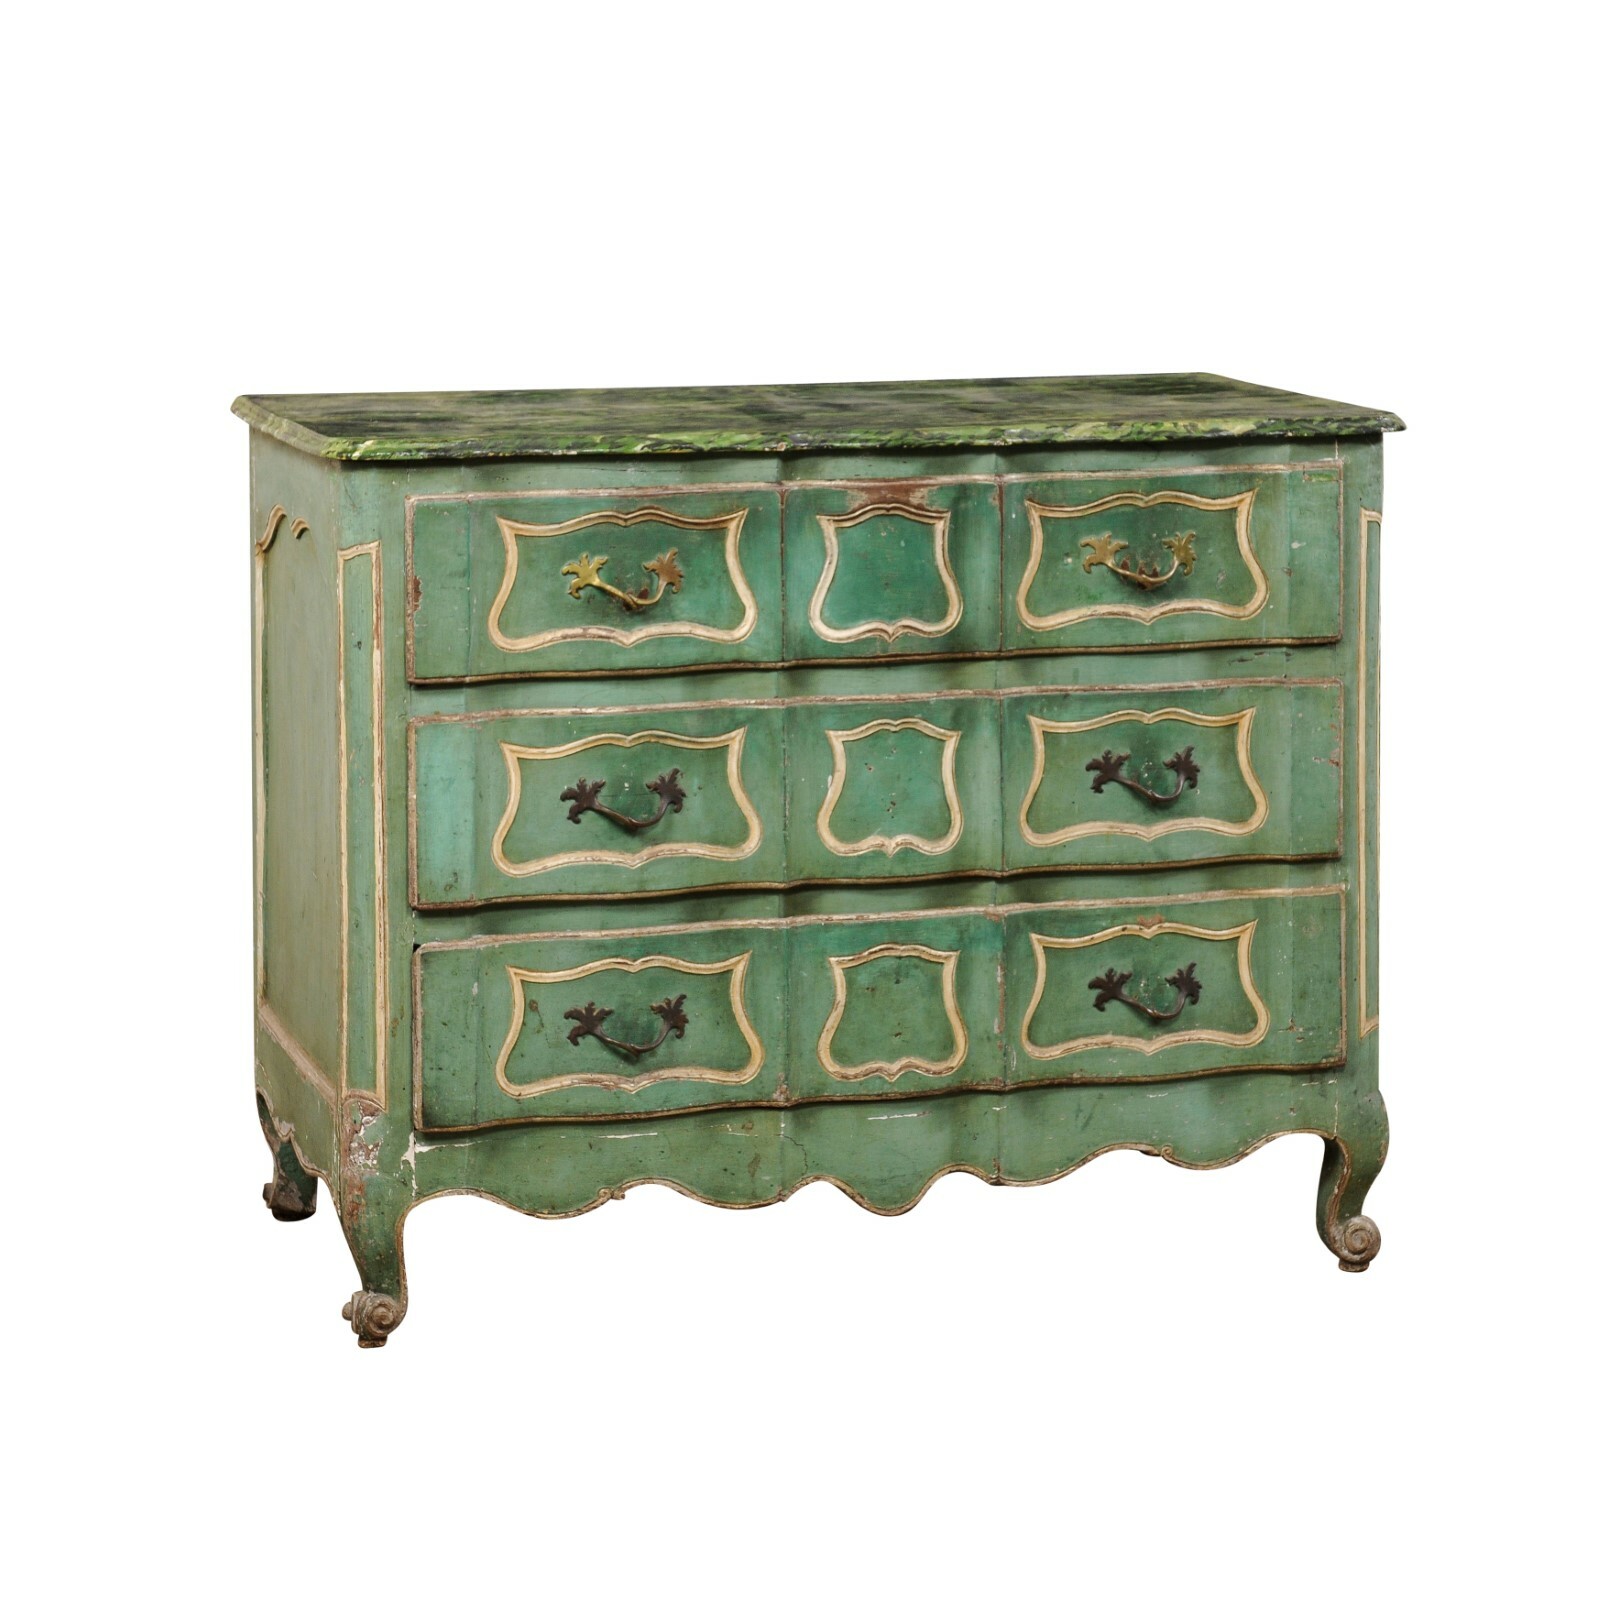 18th C. French Painted Rococo Commode